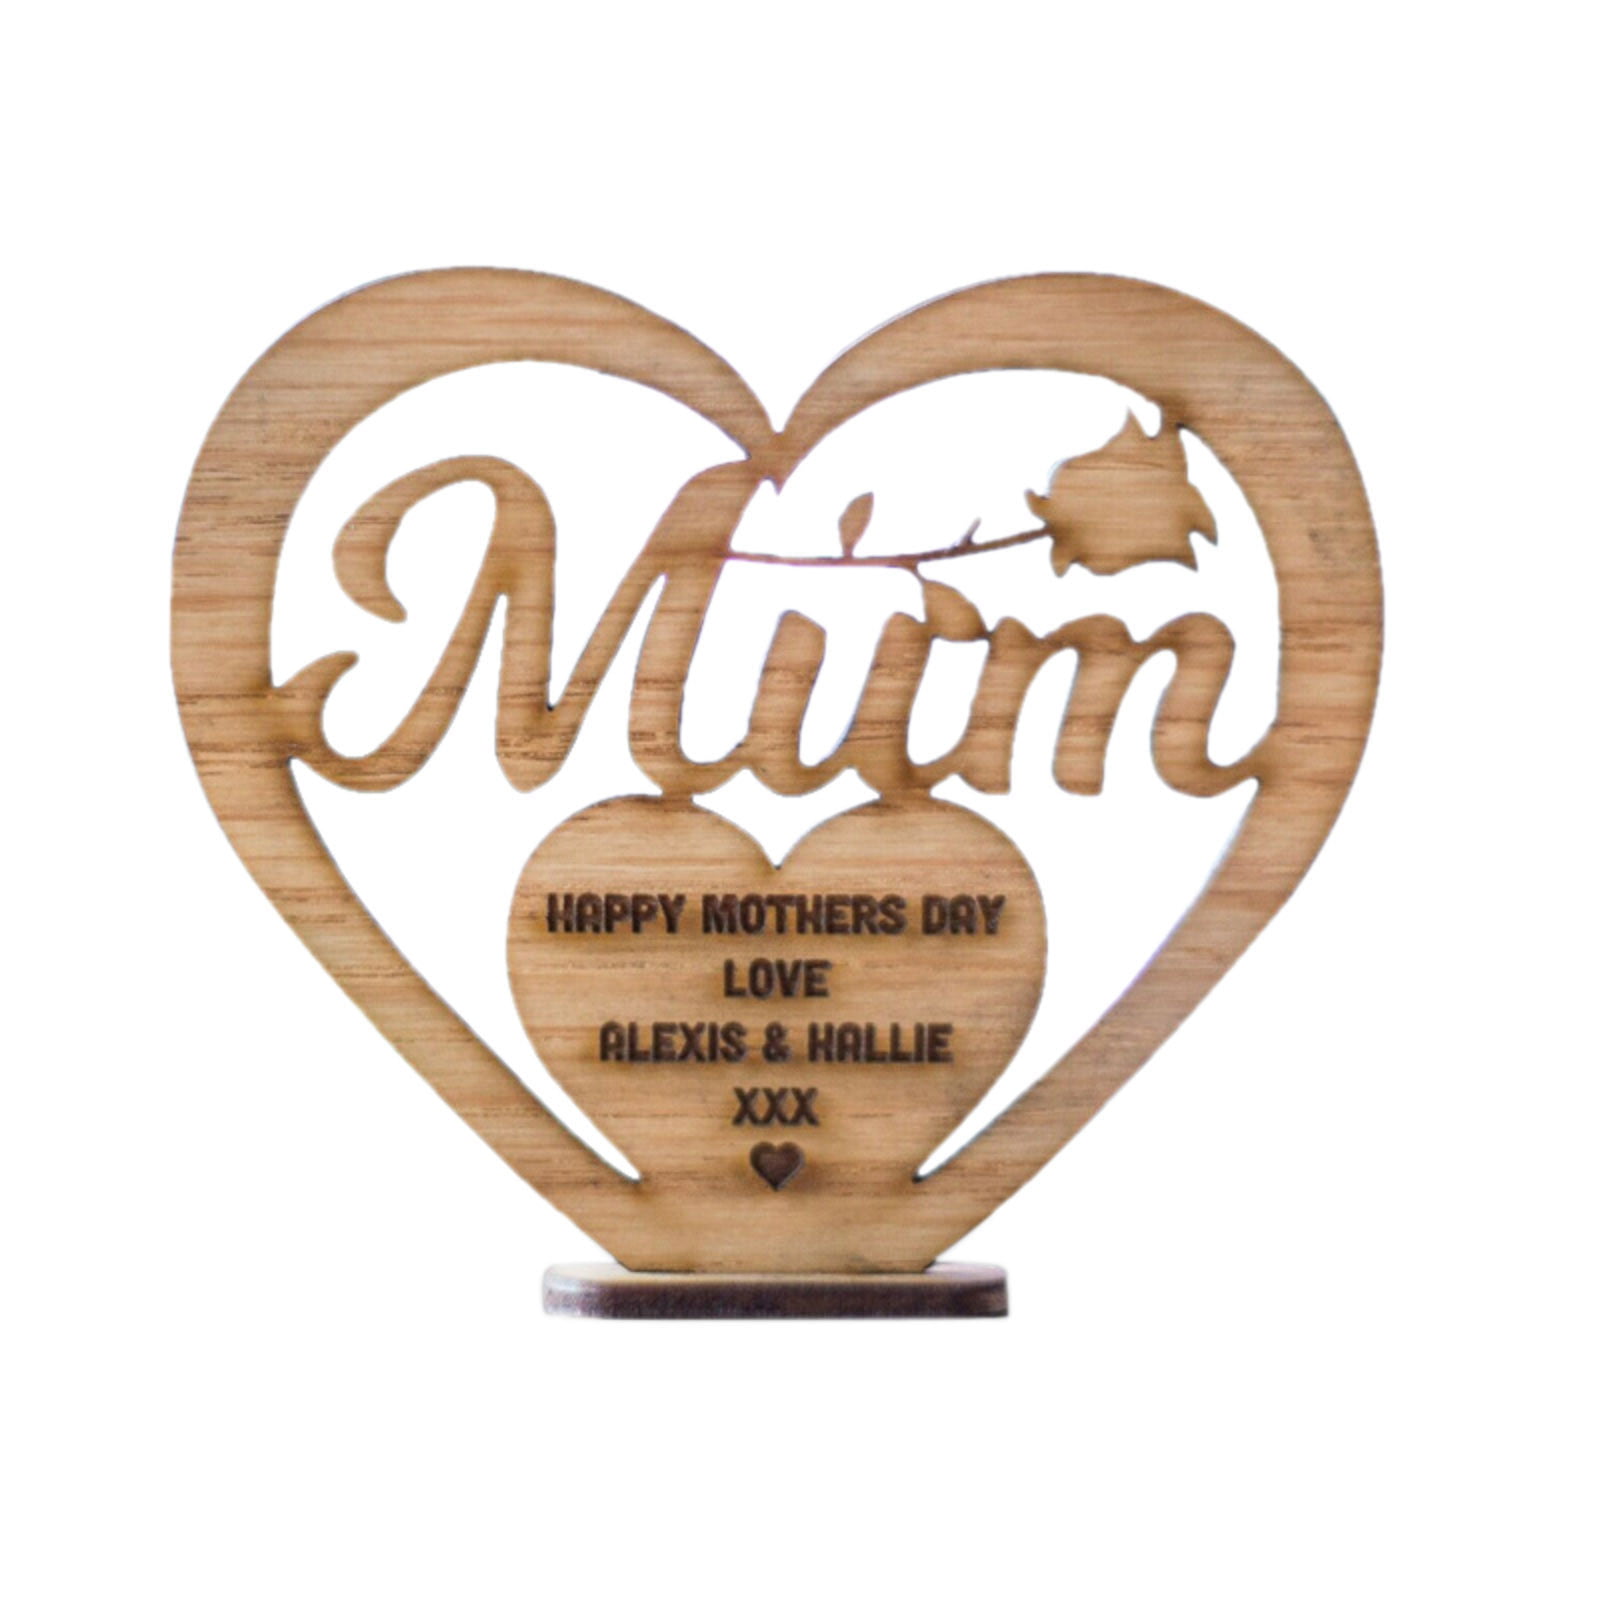 PERSONALISED WOODEN HEART PLAQUE VALENTINES DAY MOTHERS DAY ALL OCCASIONS TEXT 